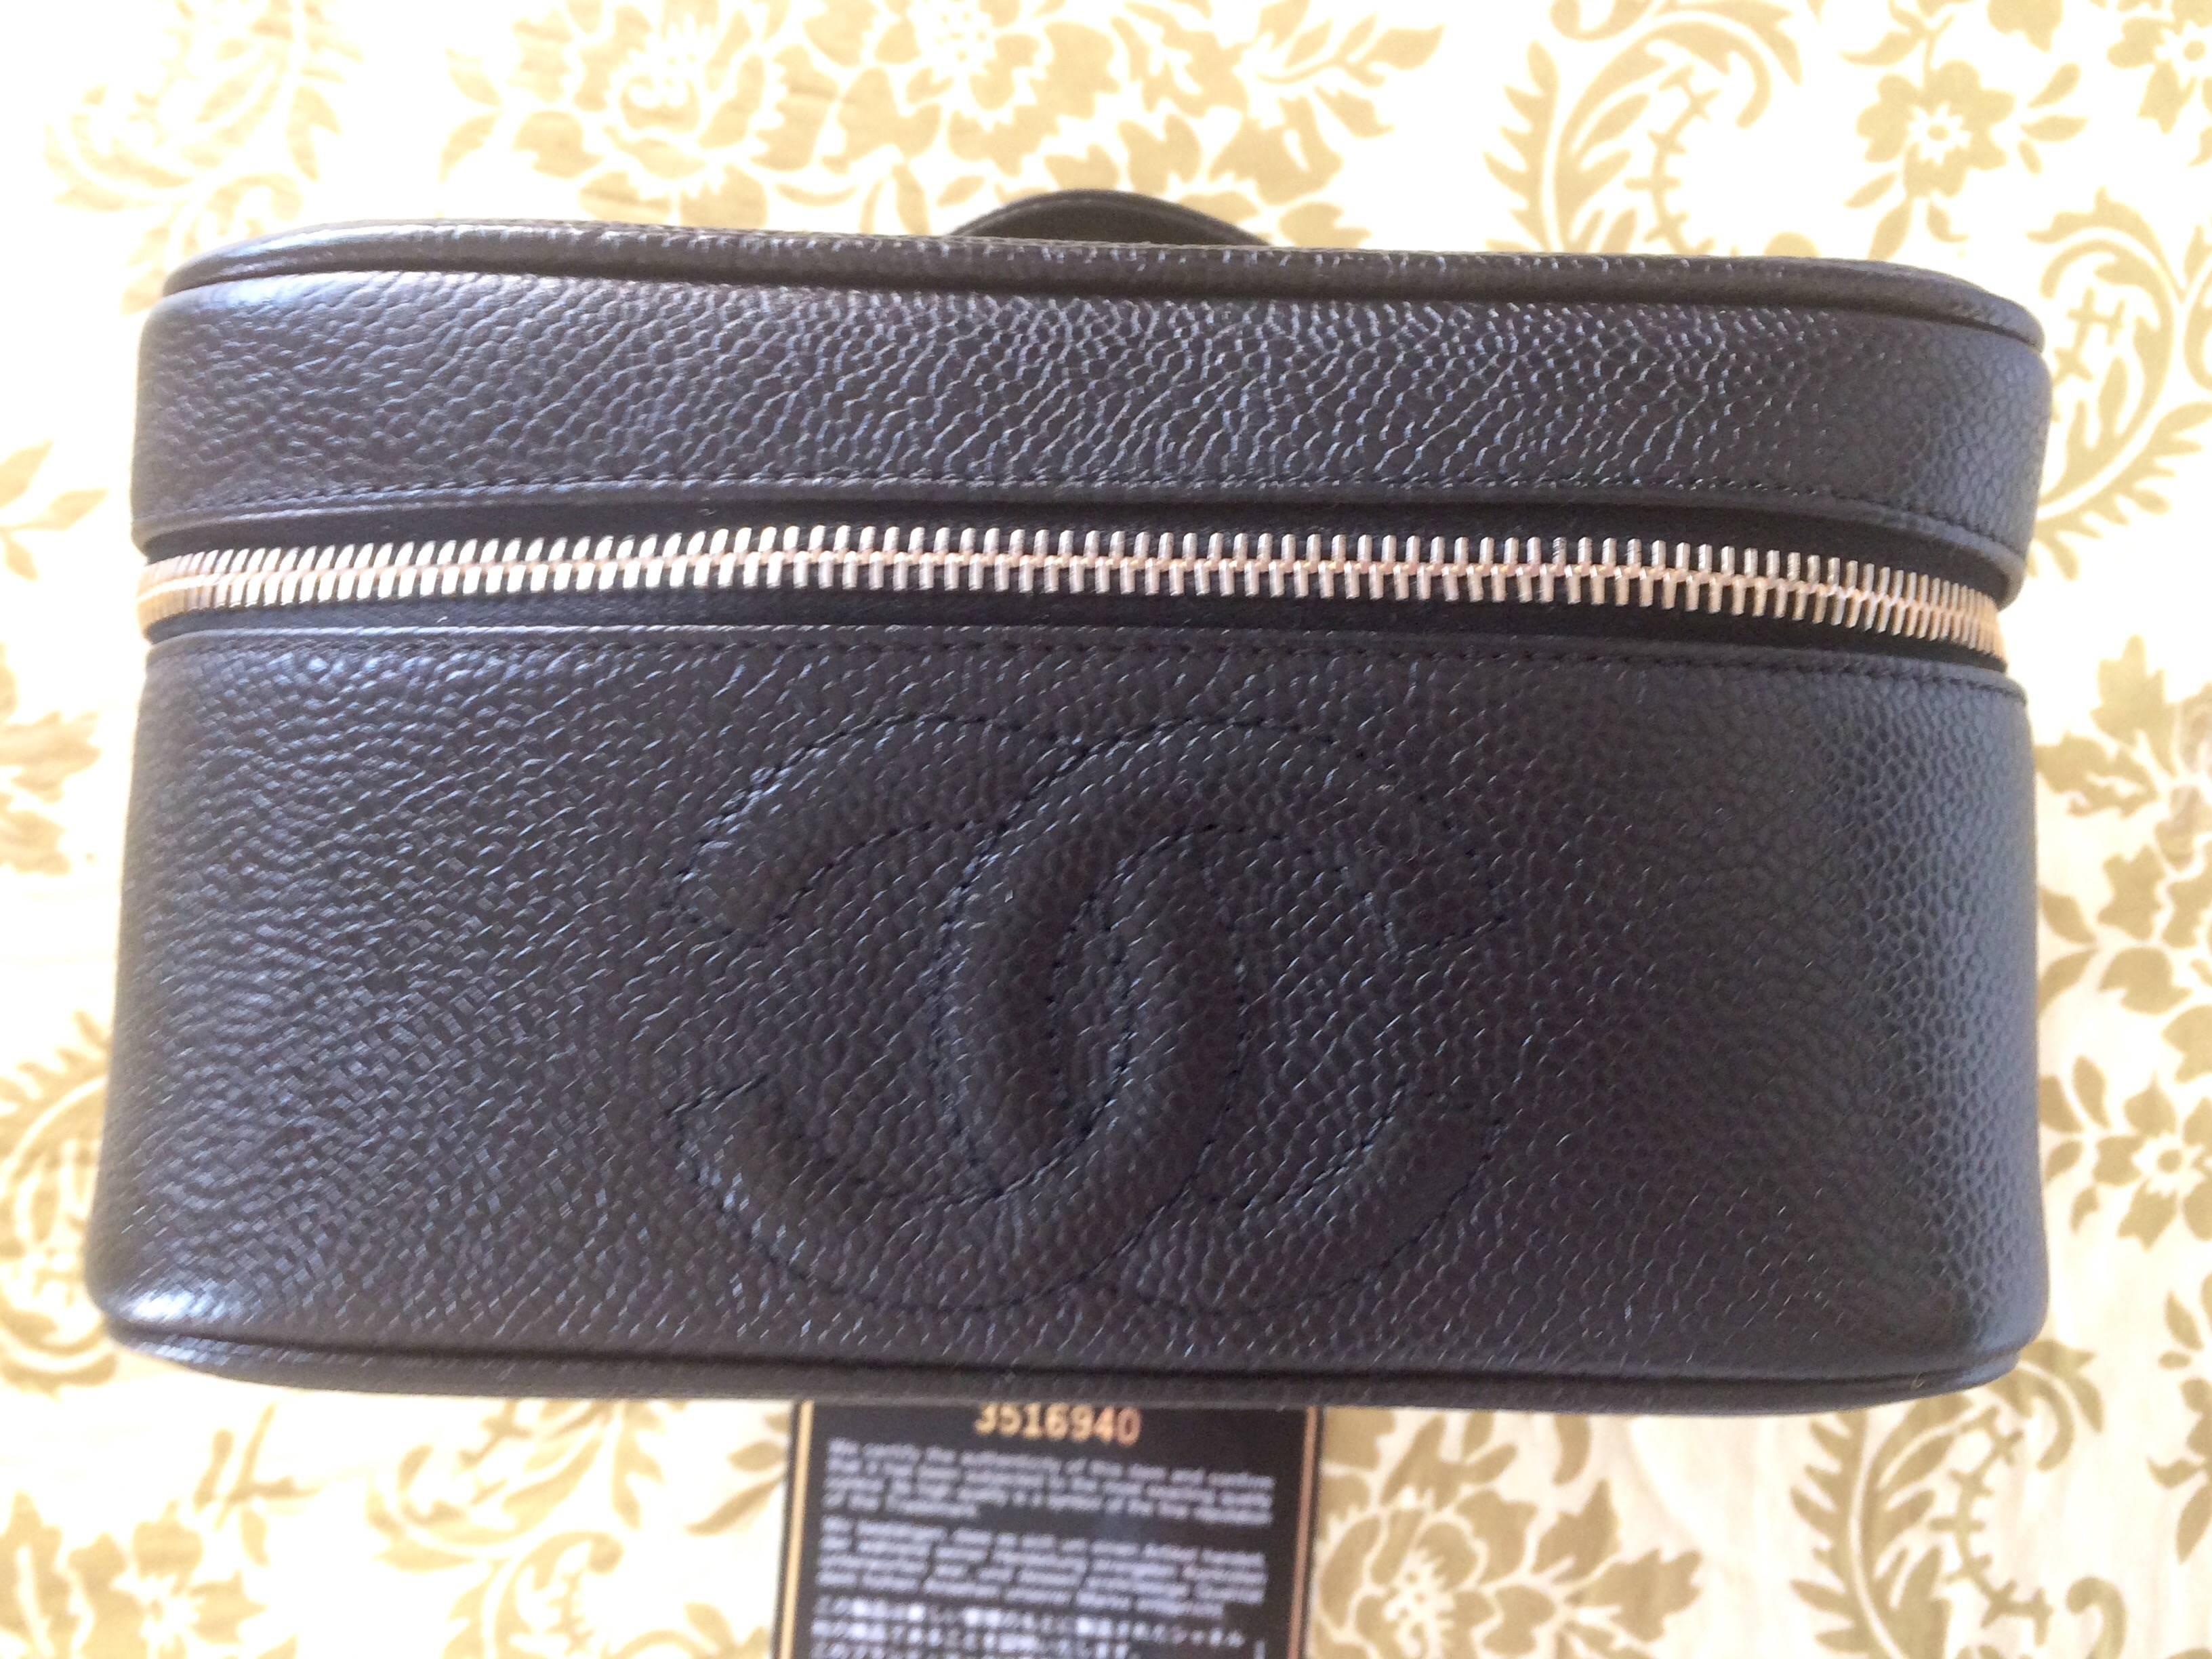 1990s. Vintage CHANEL black caviar leather cosmetic and toiletry bag, party vanity purse with large CC stitch mark. Very chic and classic pouch.
Introducing another classic vintage piece from CHANEL.... cosmetic bag, party vanity purse, mini handbag